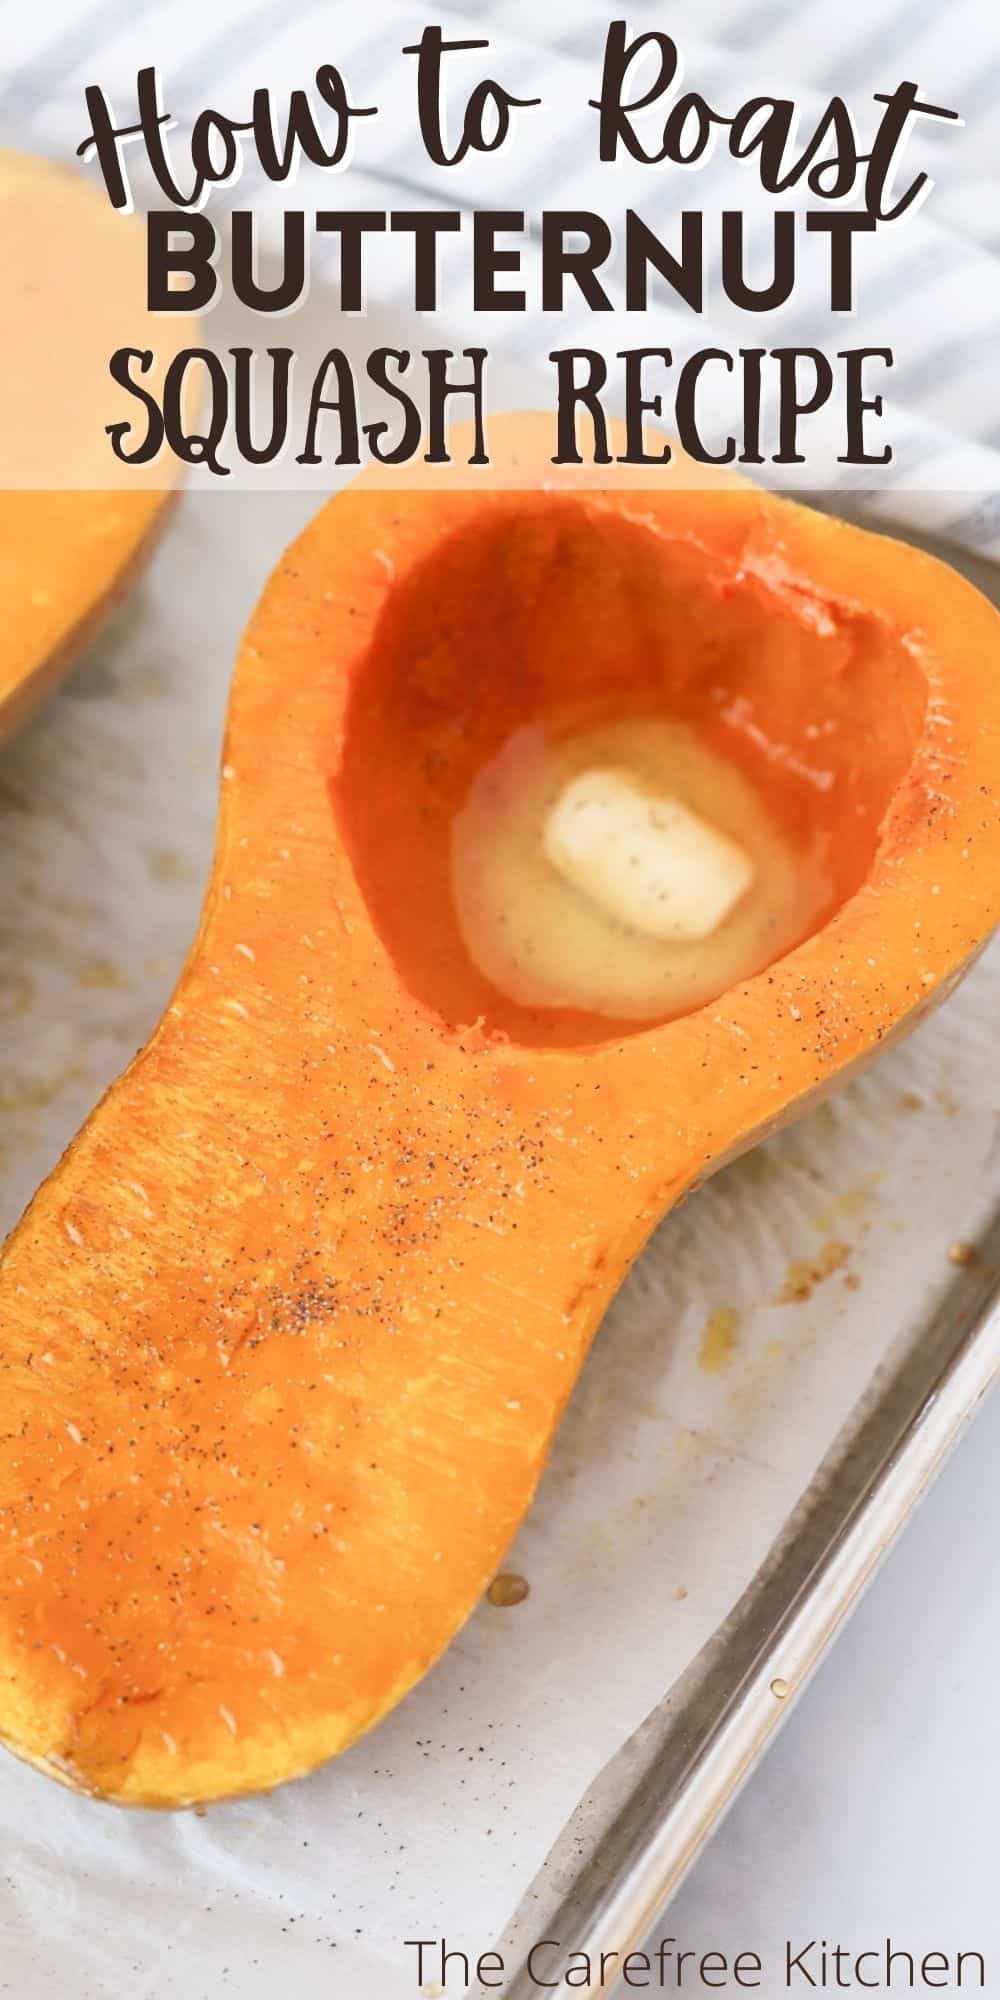 How to Roast Butternut Squash Whole - The Carefree Kitchen